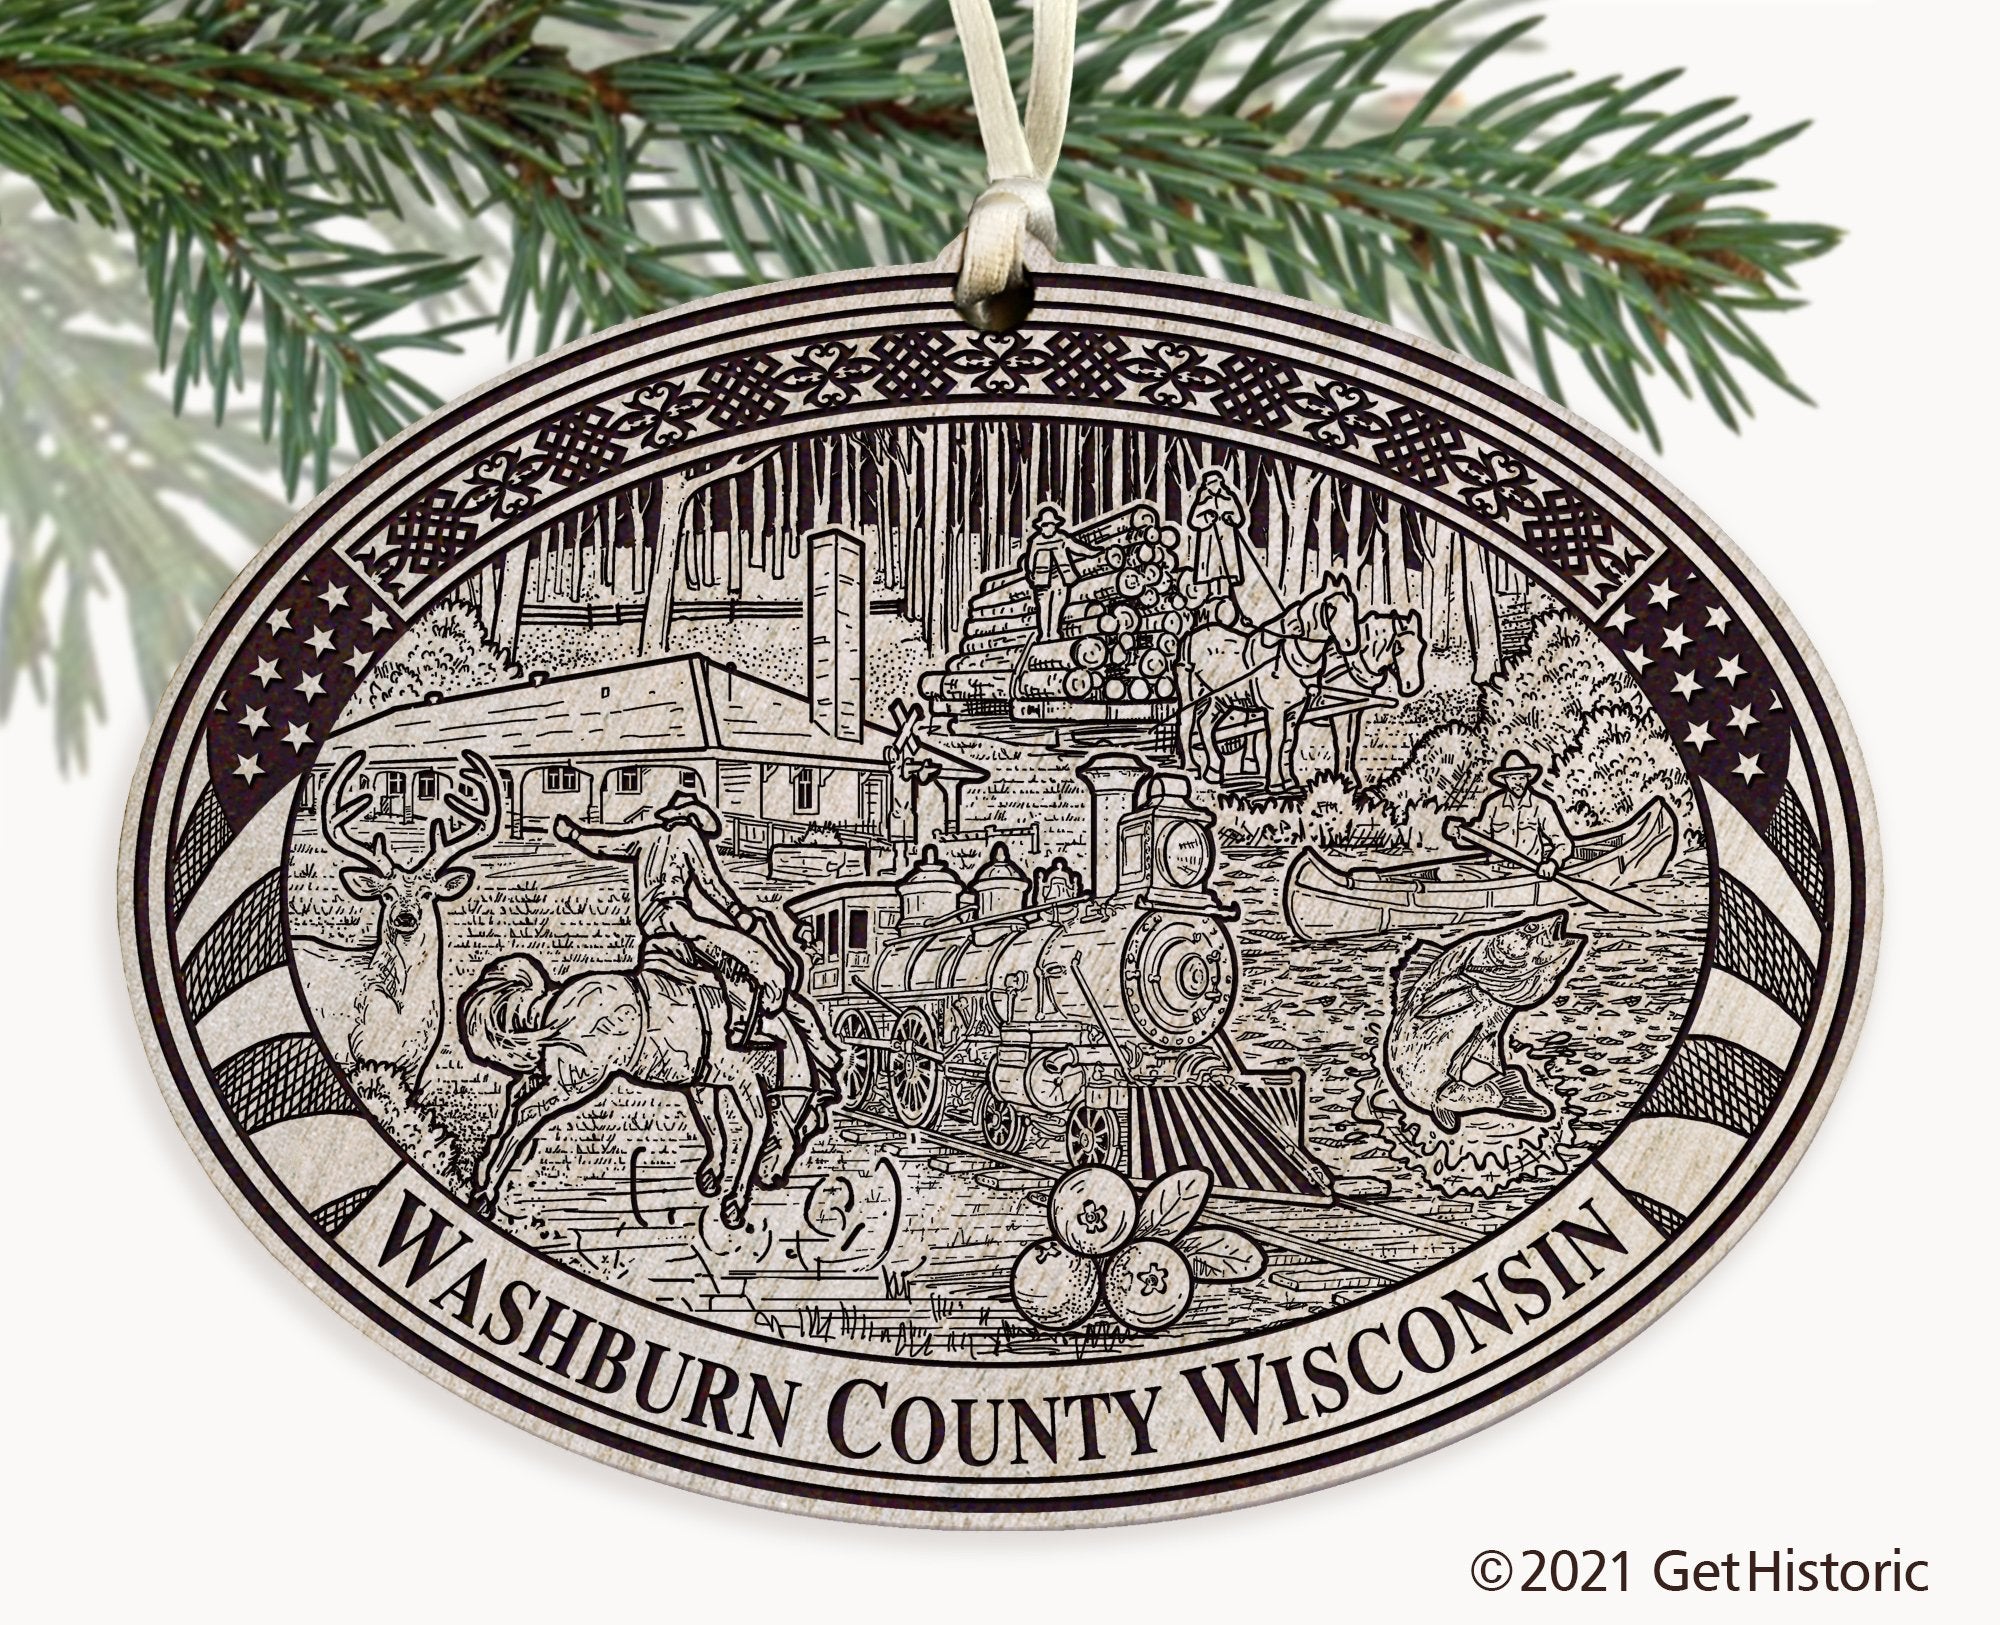 Washburn County Wisconsin Engraved Ornament